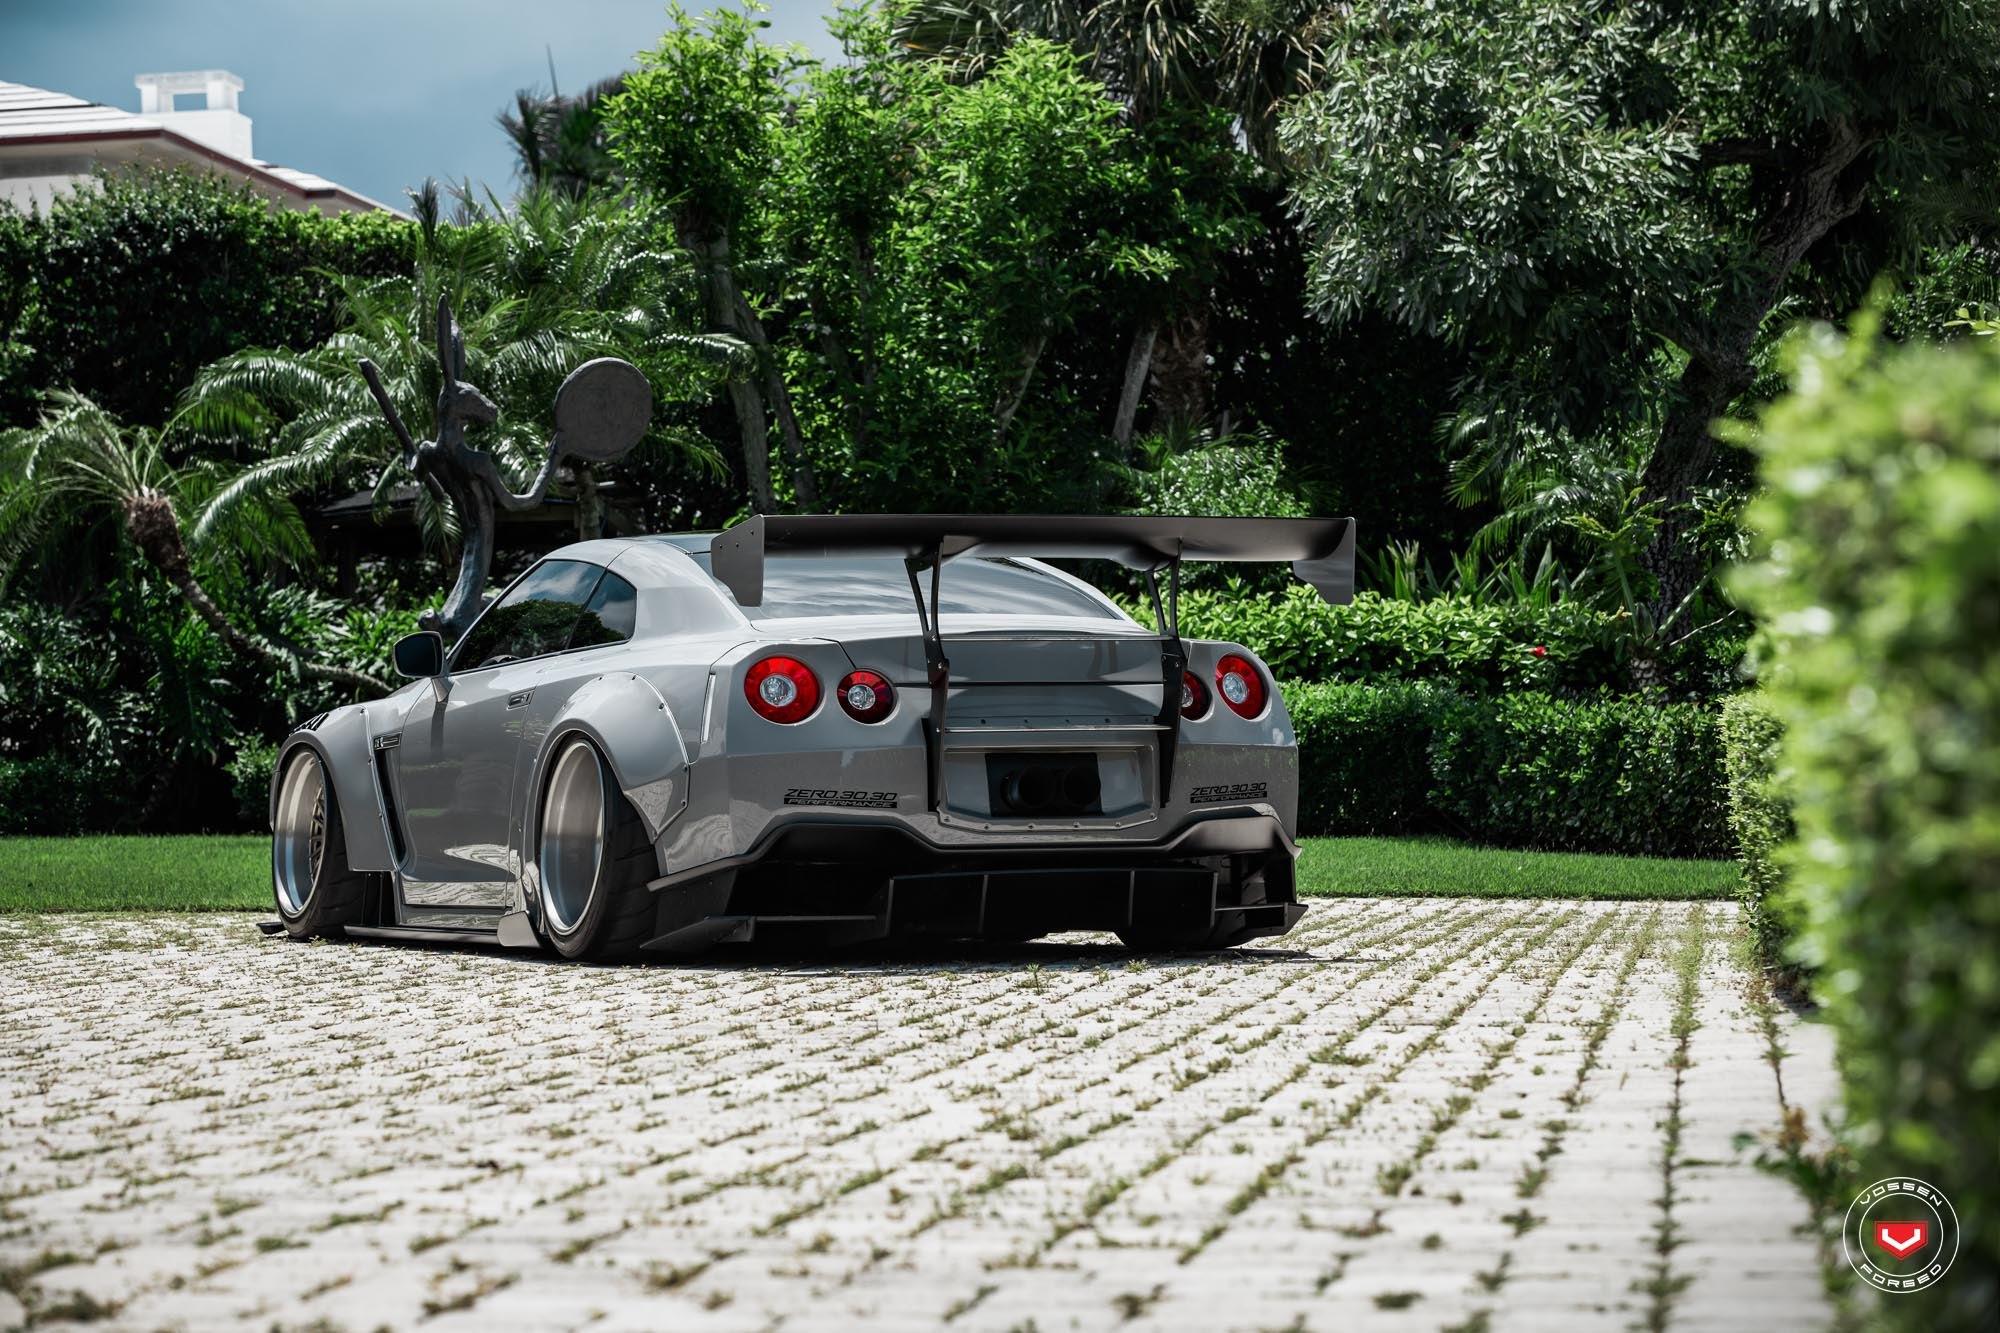 Gray Nissan GT-R with Custom Rear Diffuser - Photo by Vossen Wheels